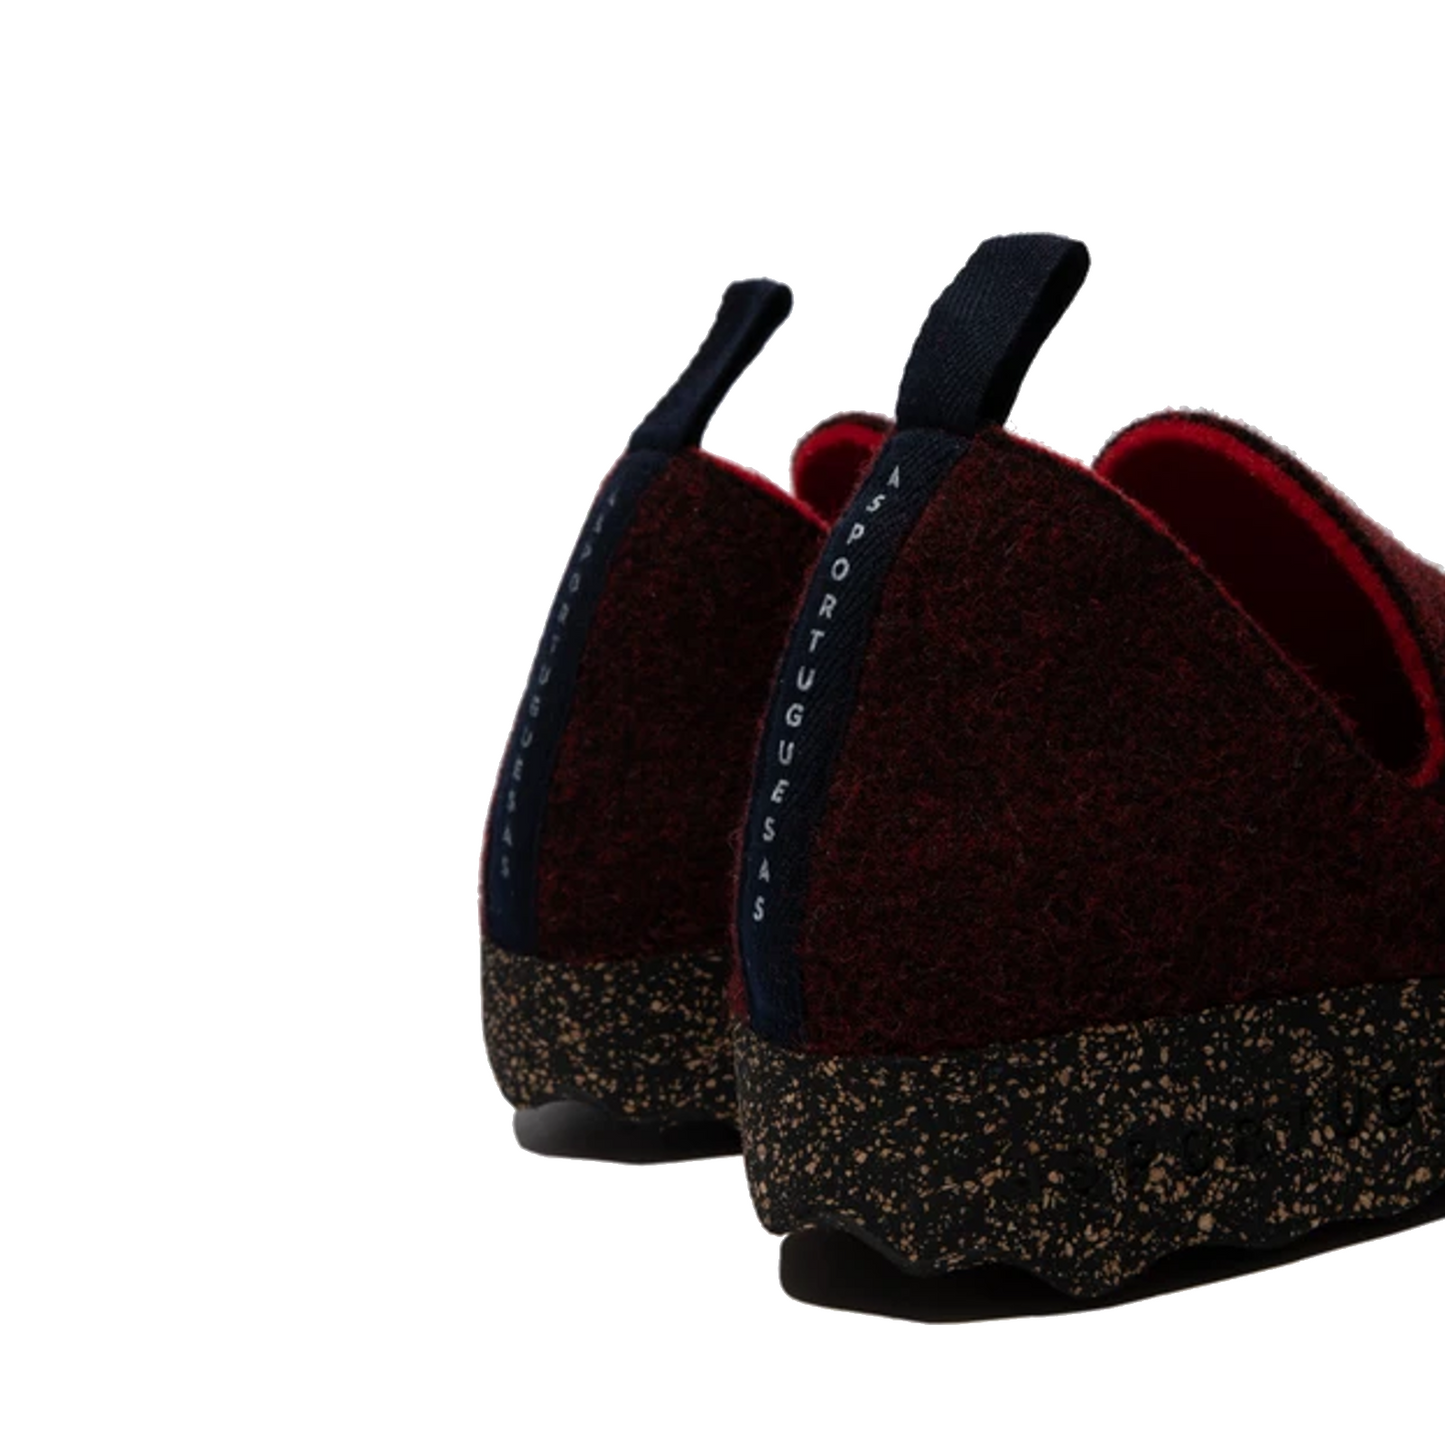 AW21-City Merlot (size 36) - ONLINE ONLY